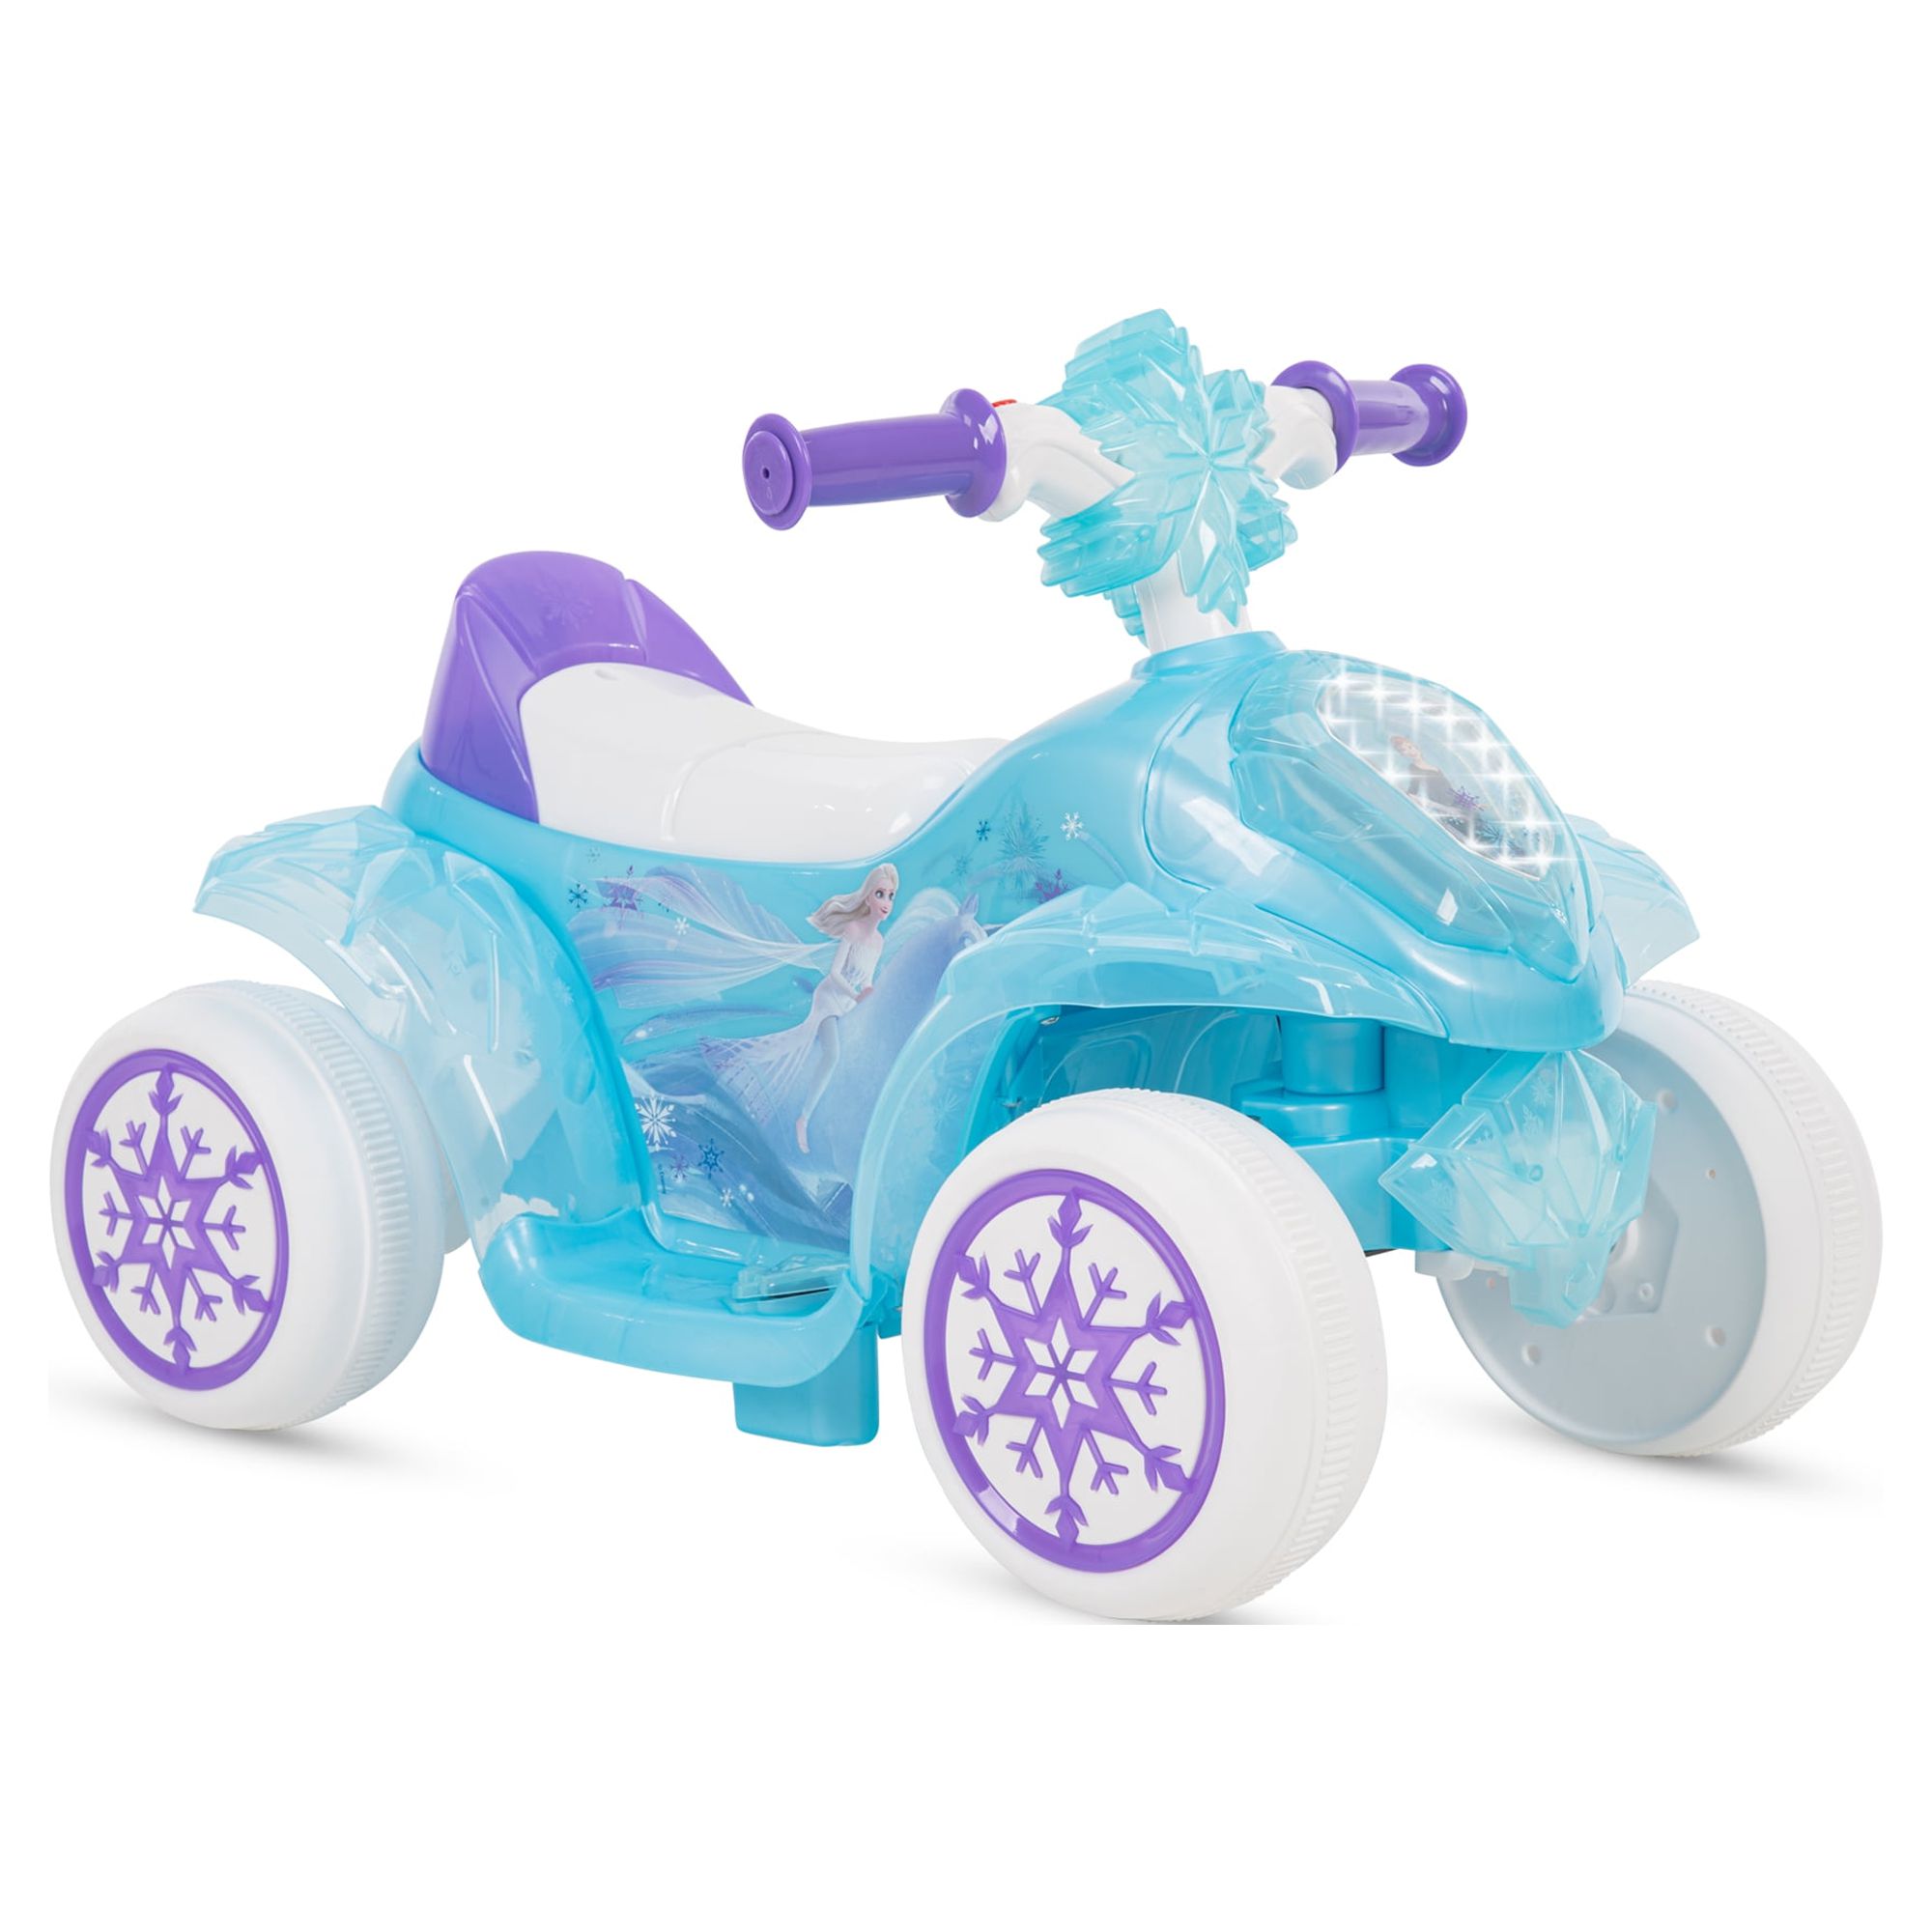 Disney Frozen 6 Volts Electric Ride-on Quad for Girls, Ages 1.5+ Years, by Huffy - image 5 of 15